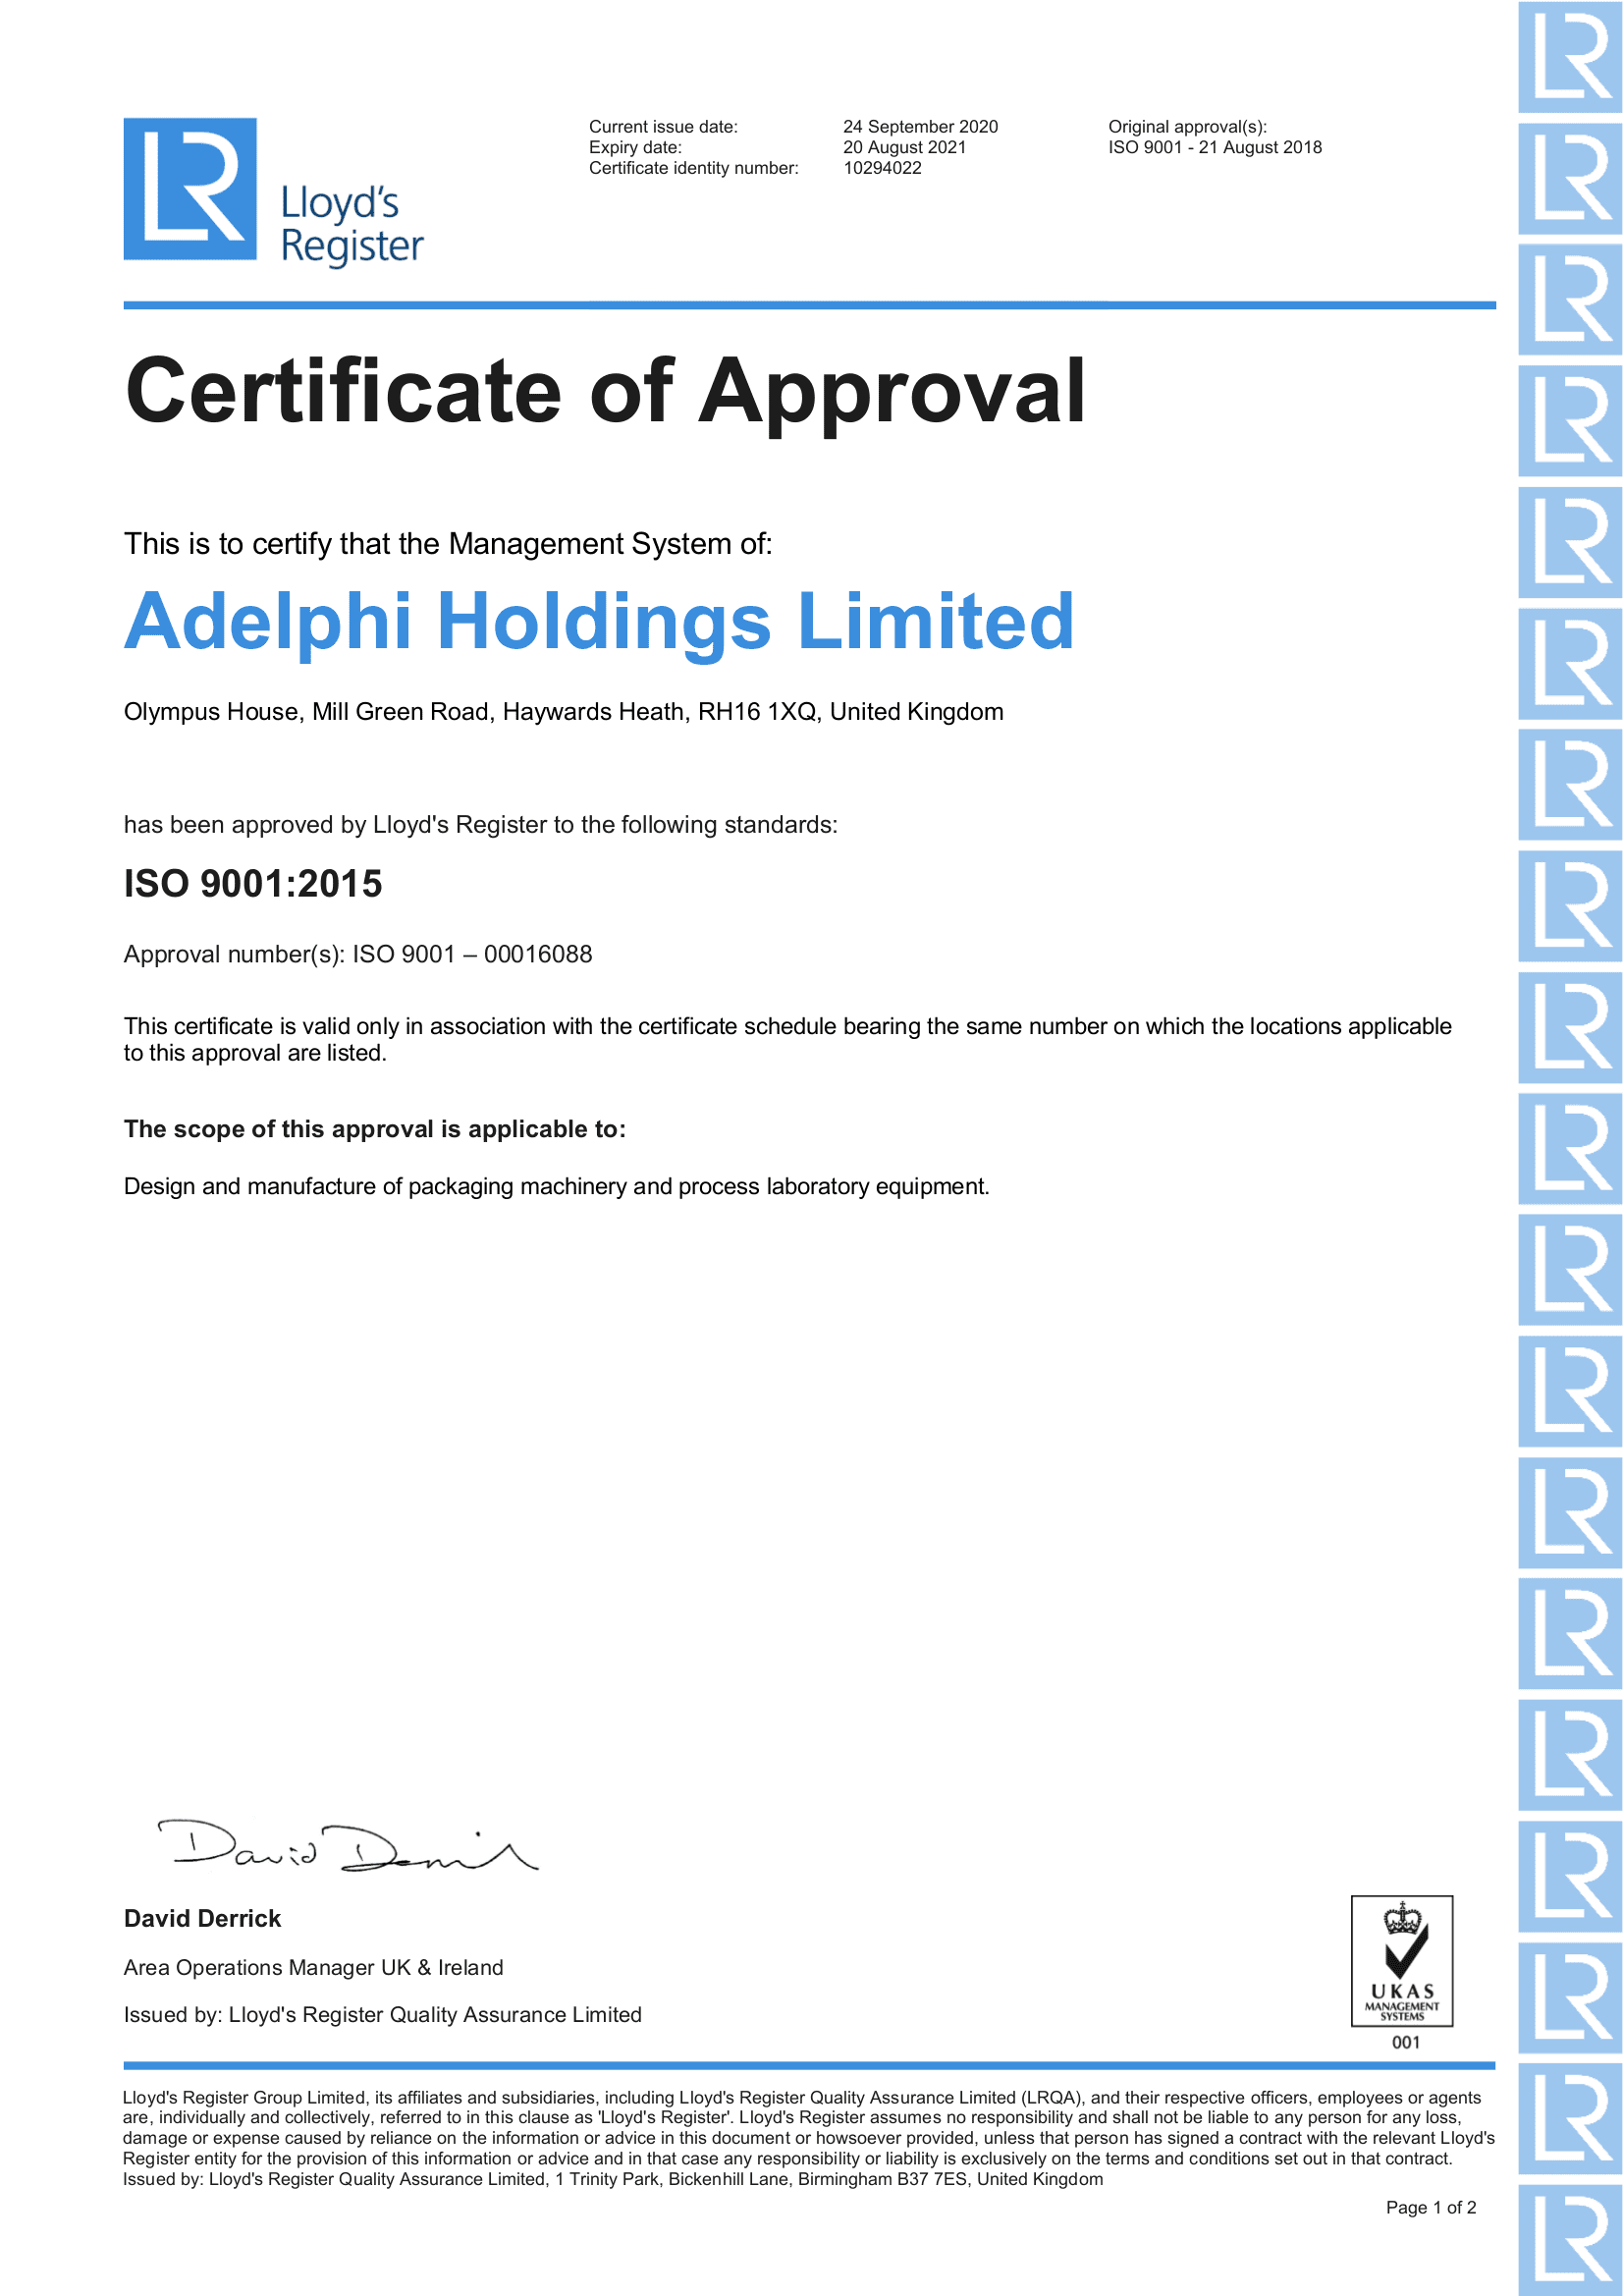 Both pull stack Certification & Documents - Adelphi